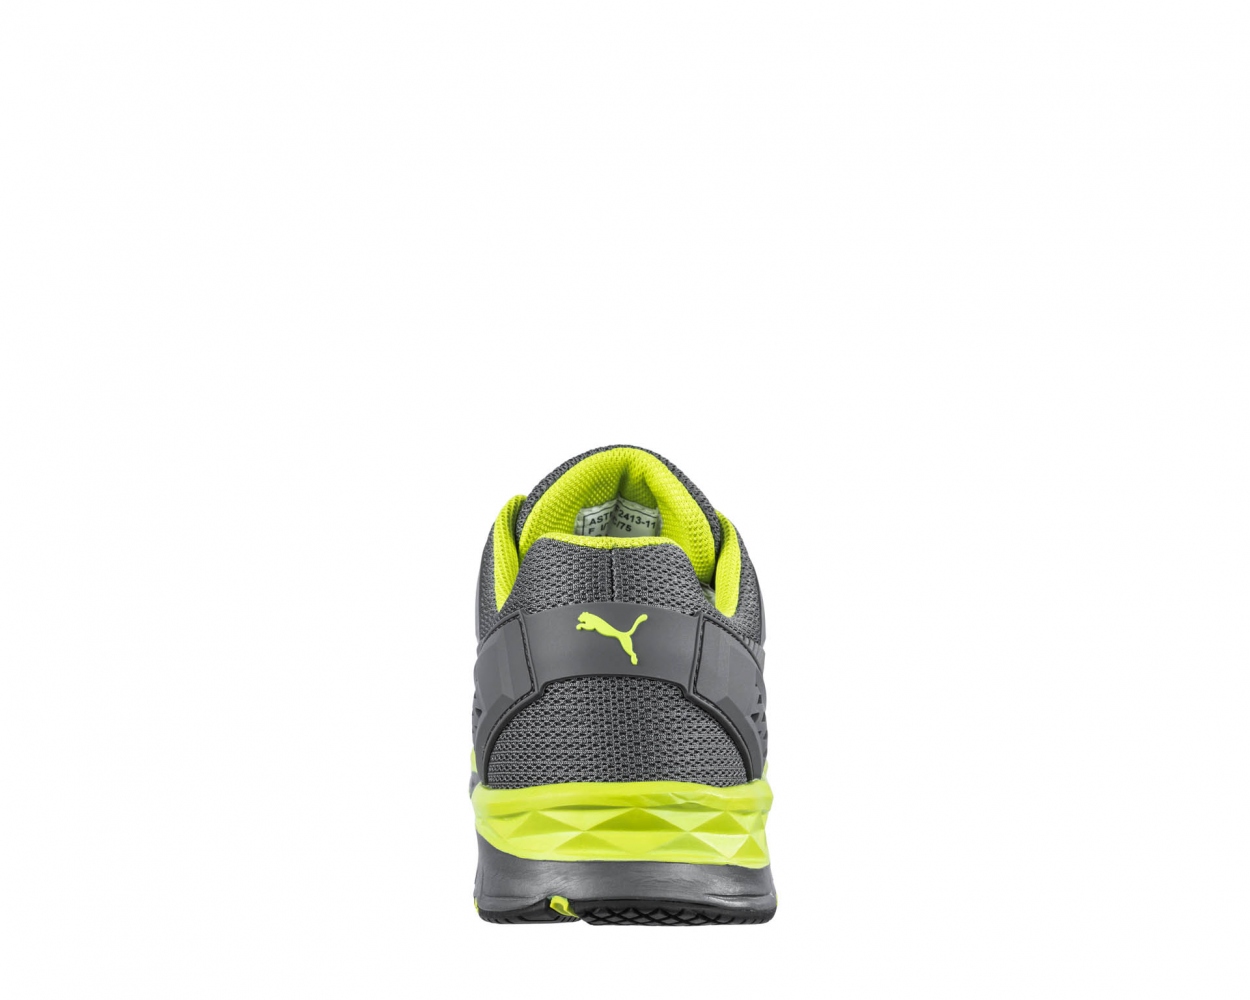 PUMA 643880 FUSE MOTION 2.0 safety shoes S1P ESD HRO SRC - online purchase  | Euro Industry